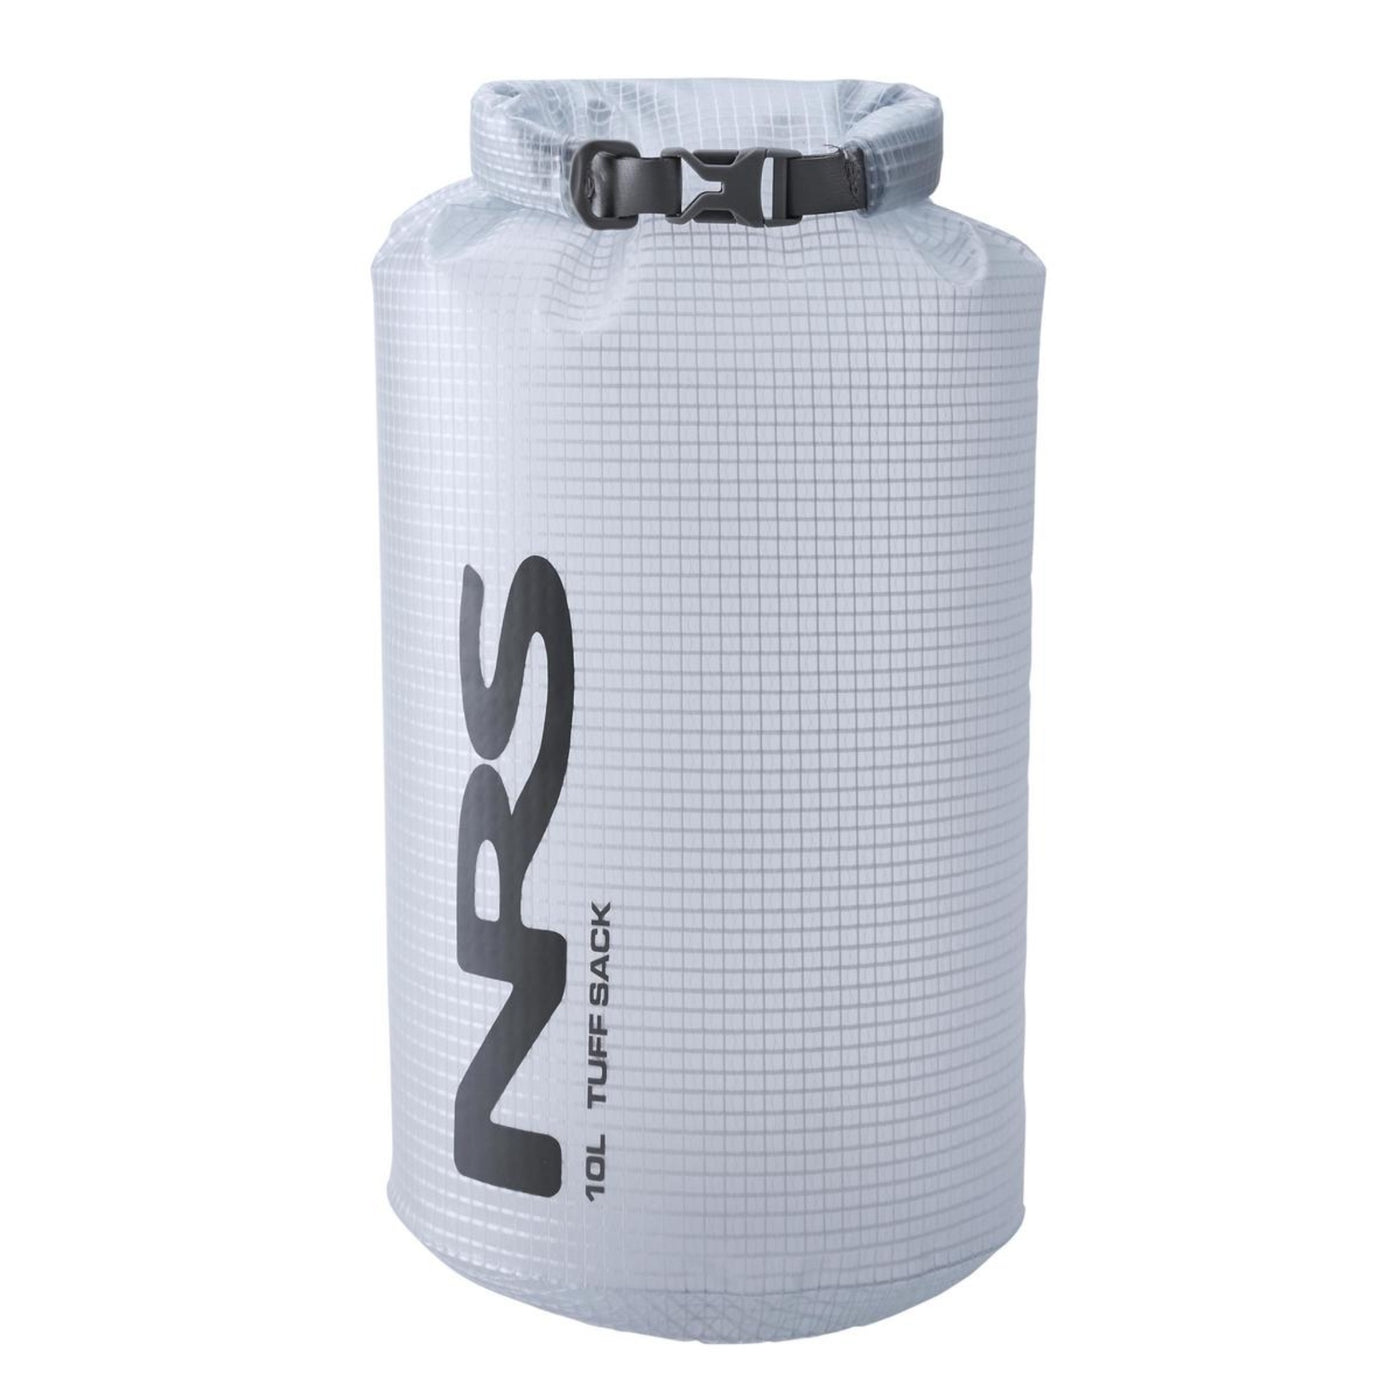 NRS Tuff Sack Dry Bag 15L | Kayak Dry Bags and Accessories | NRS NZ | Further Faster Christchurch NZ #clear